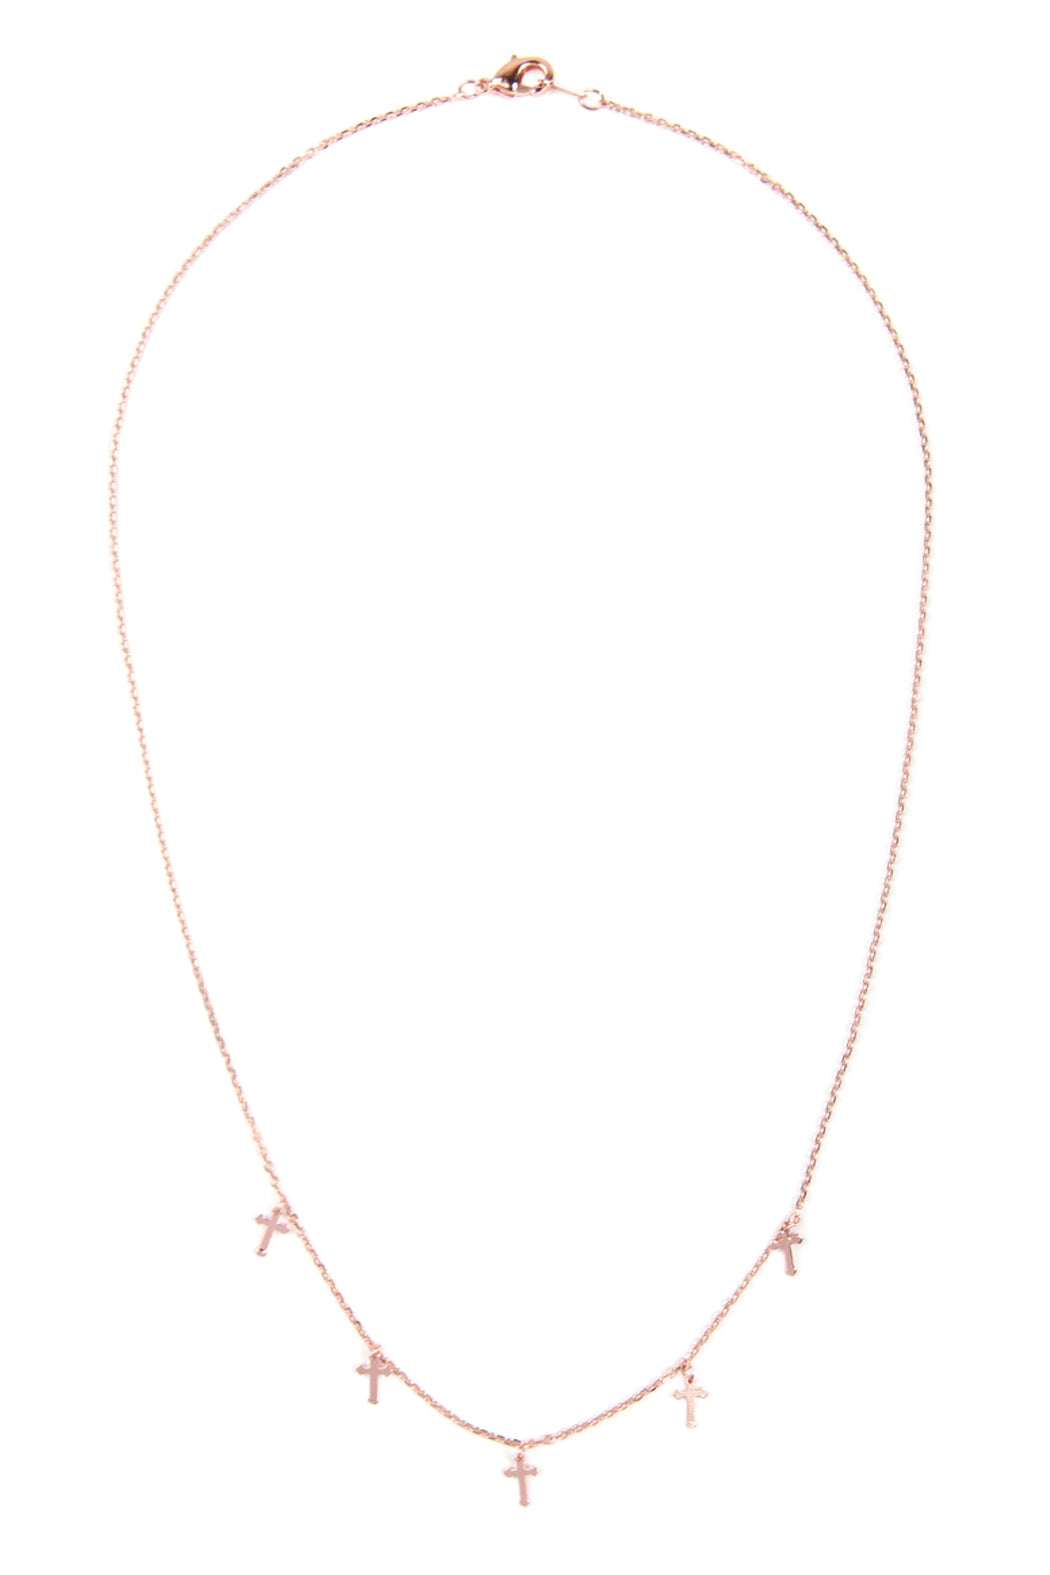 5 DAINTY SMALL CROSS NECKLACE